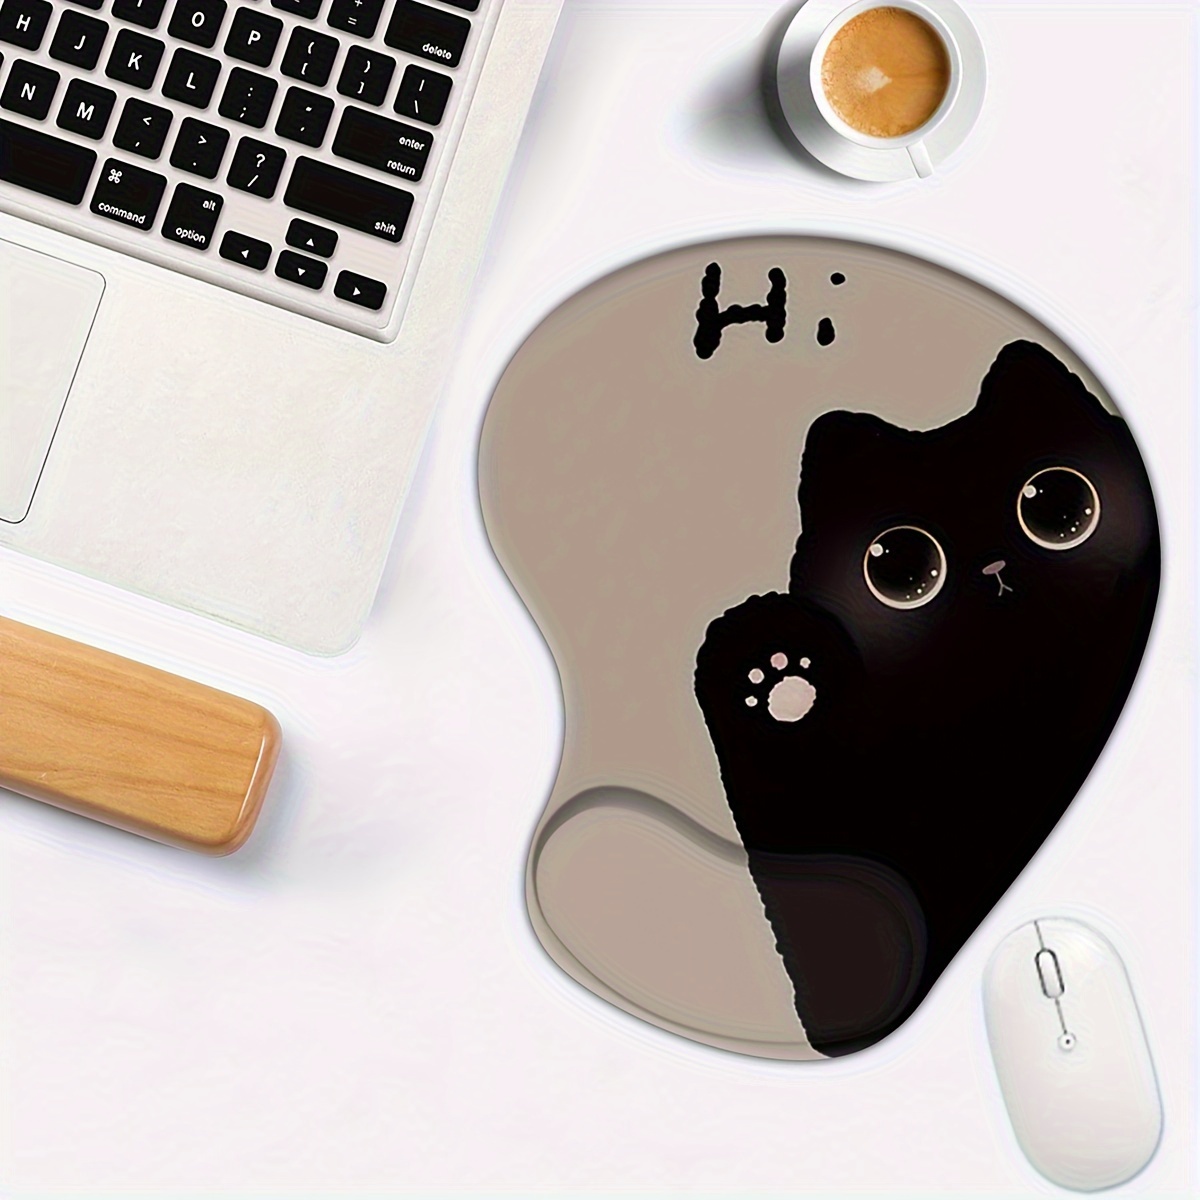 

Cute Cat Design Ergonomic Mouse Pad With Wrist Support, Customizable Washable Lycra Surface, Non-slip Rubber Base, Silicone Gel Wrist Cushion, Personalized Computer Office Mousepad